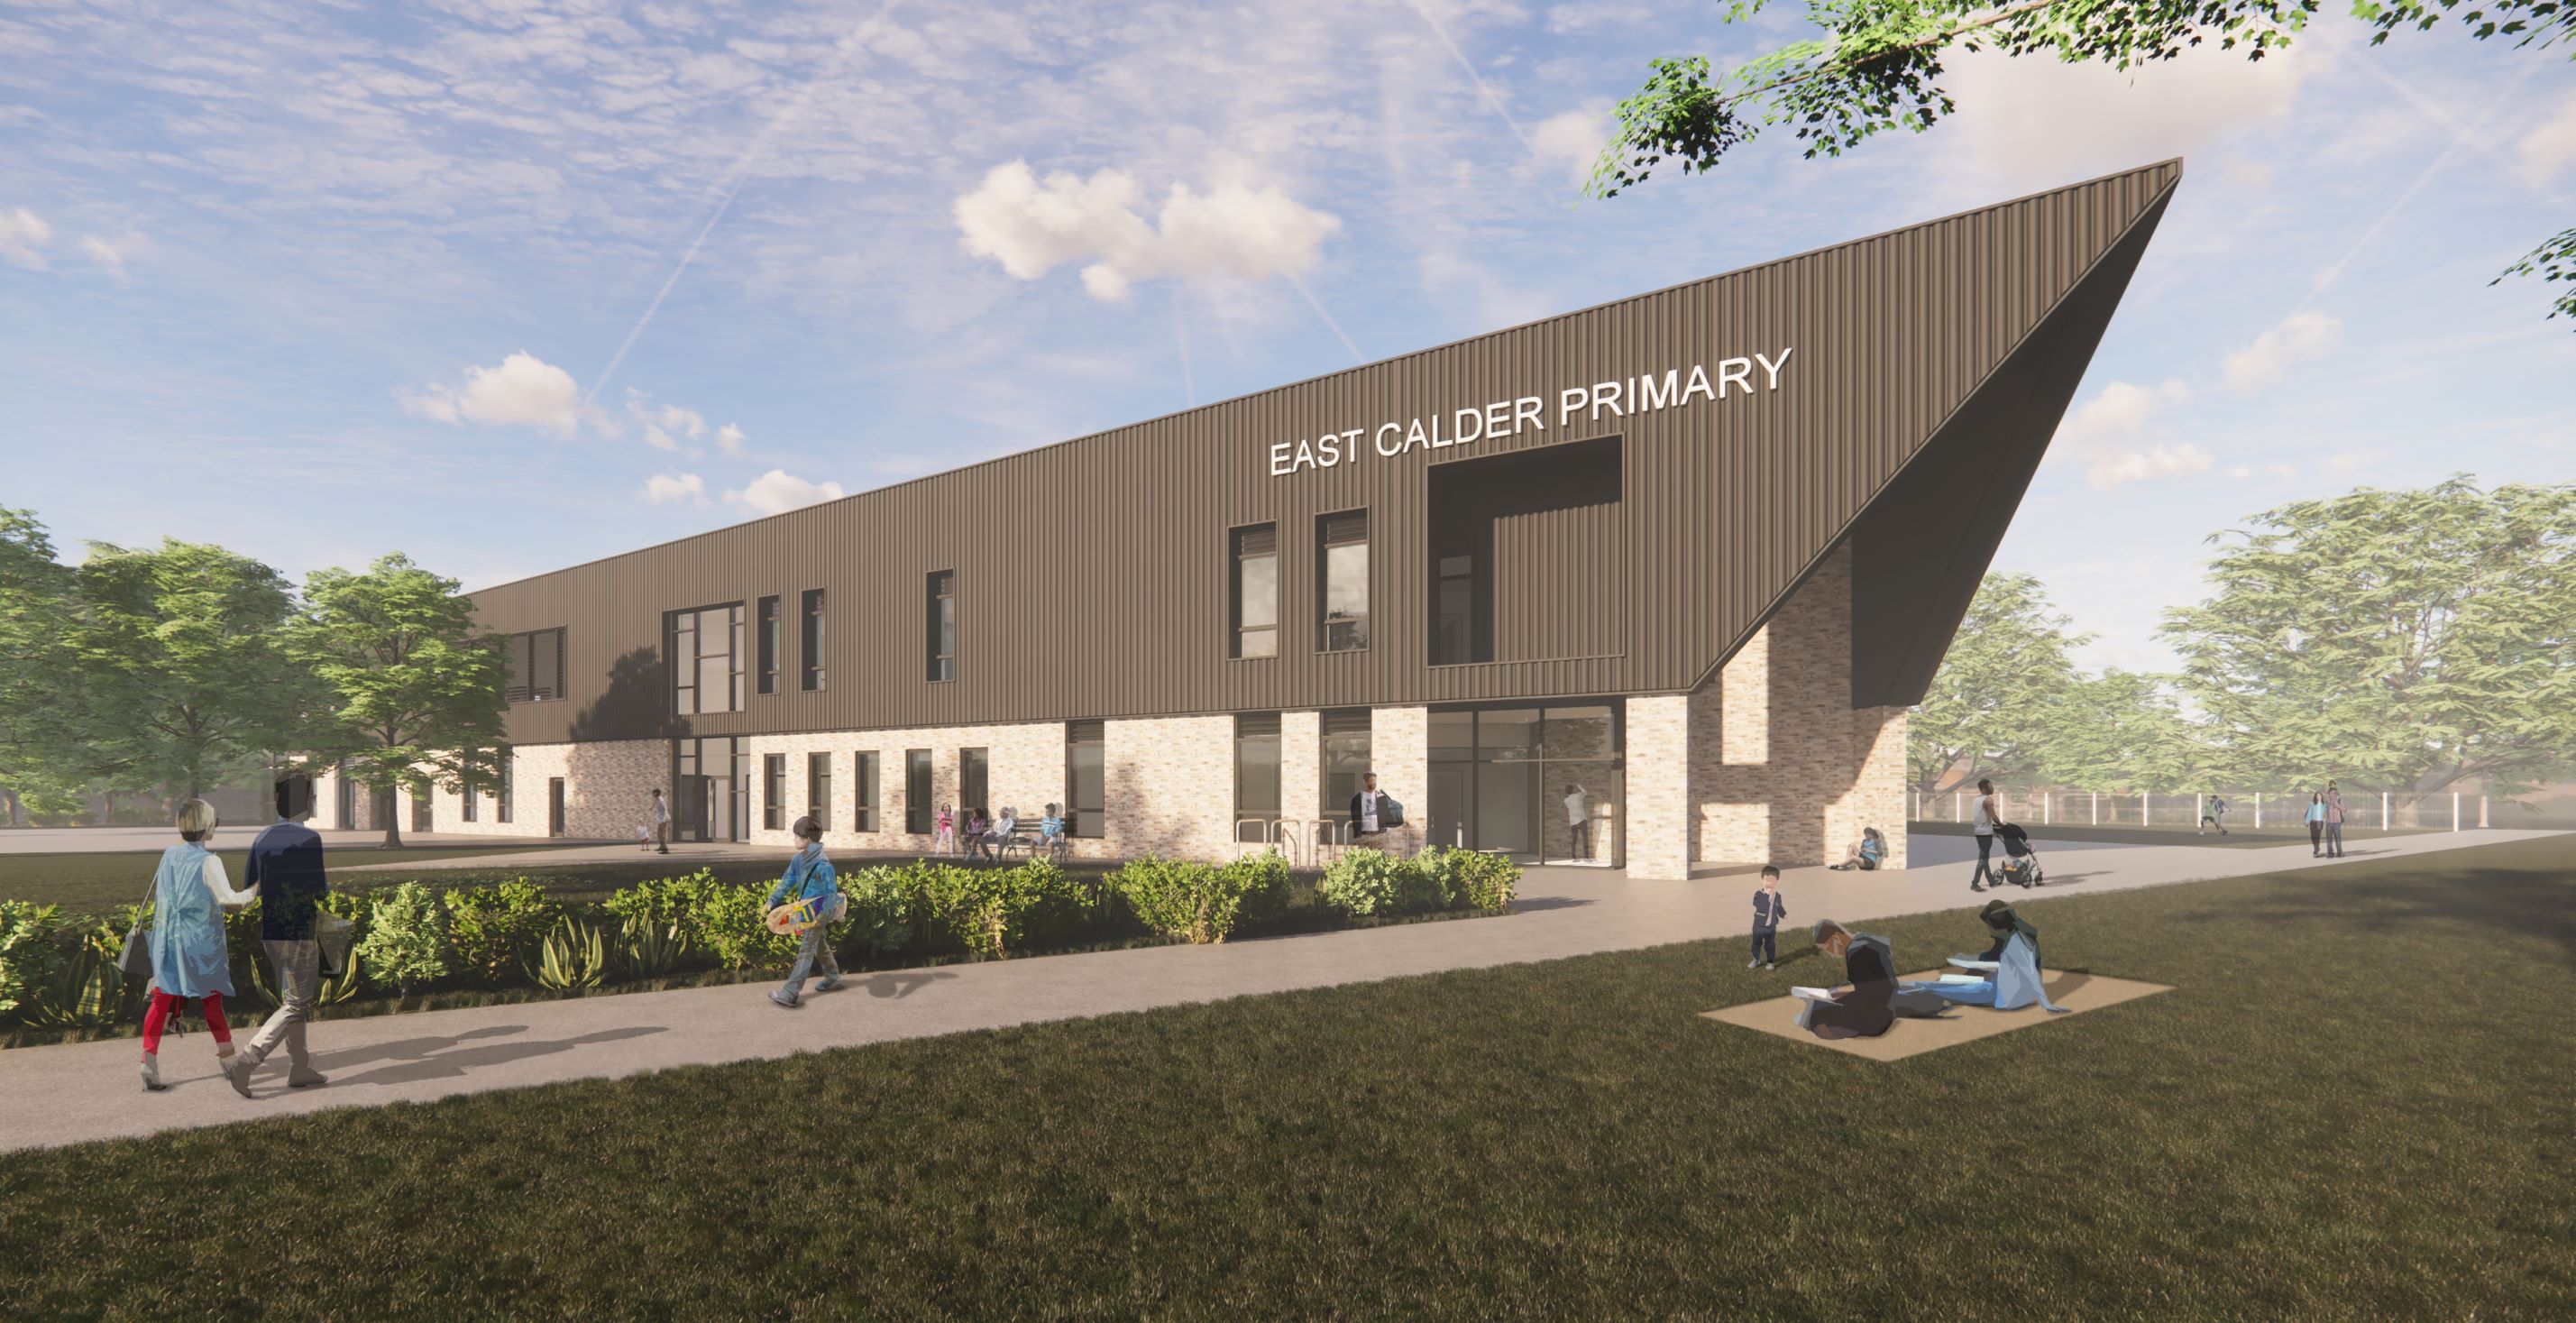 Site agreed for replacement East Calder Primary School